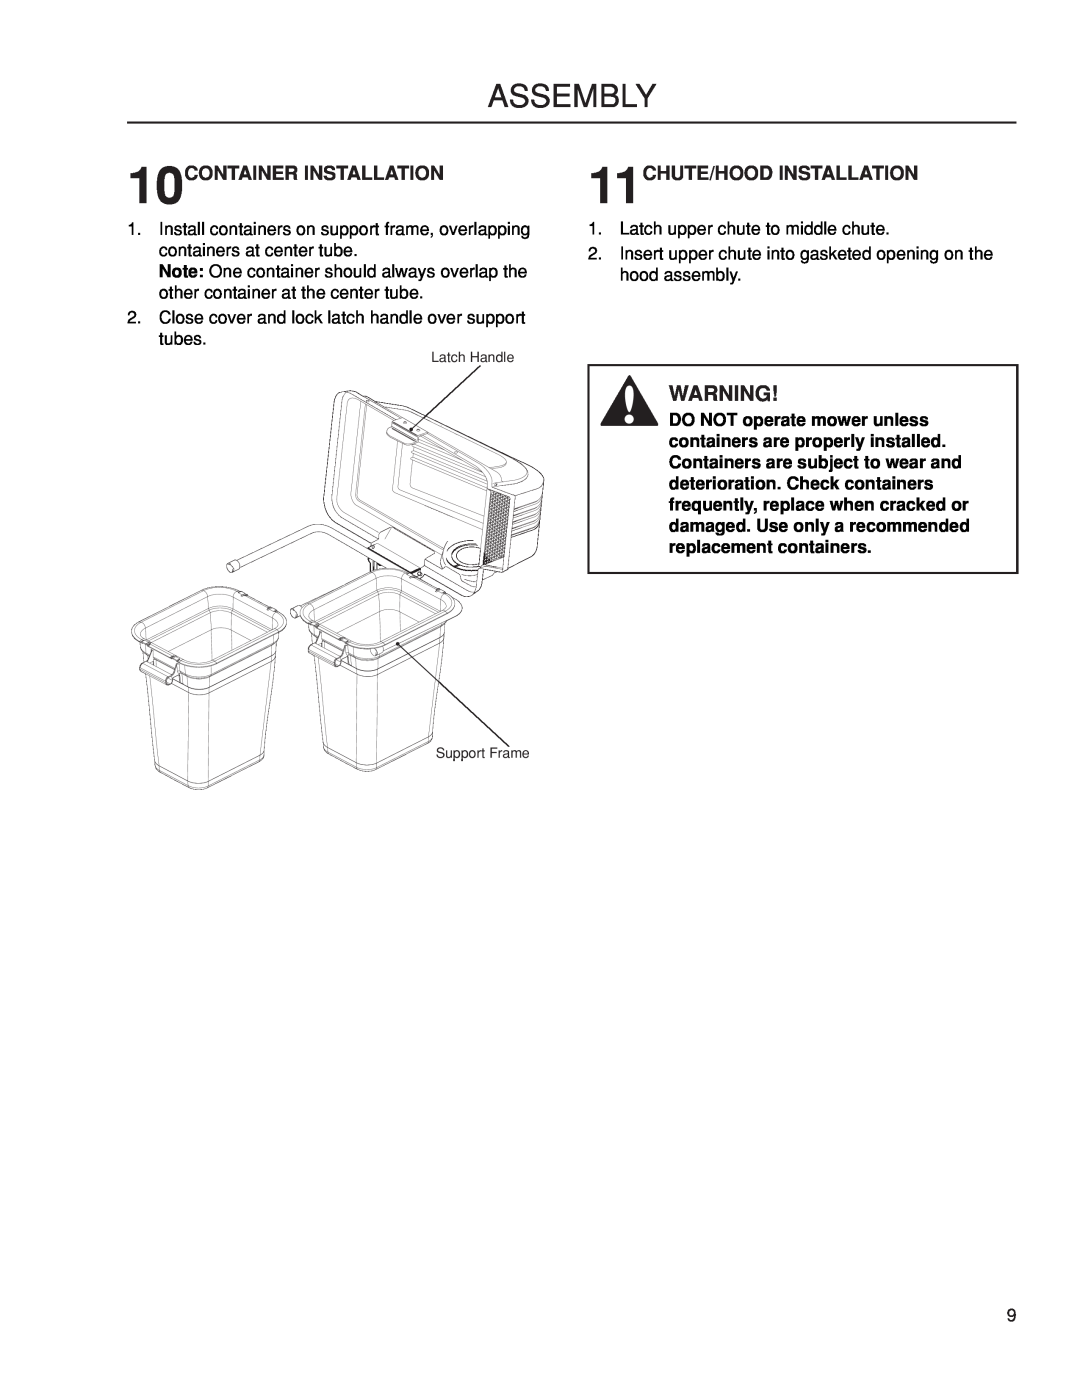 Dixon 115 239947, 966412801 manual 10CONTAINER INSTALLATION, 11CHUTE/HOOD INSTALLATION, Assembly 